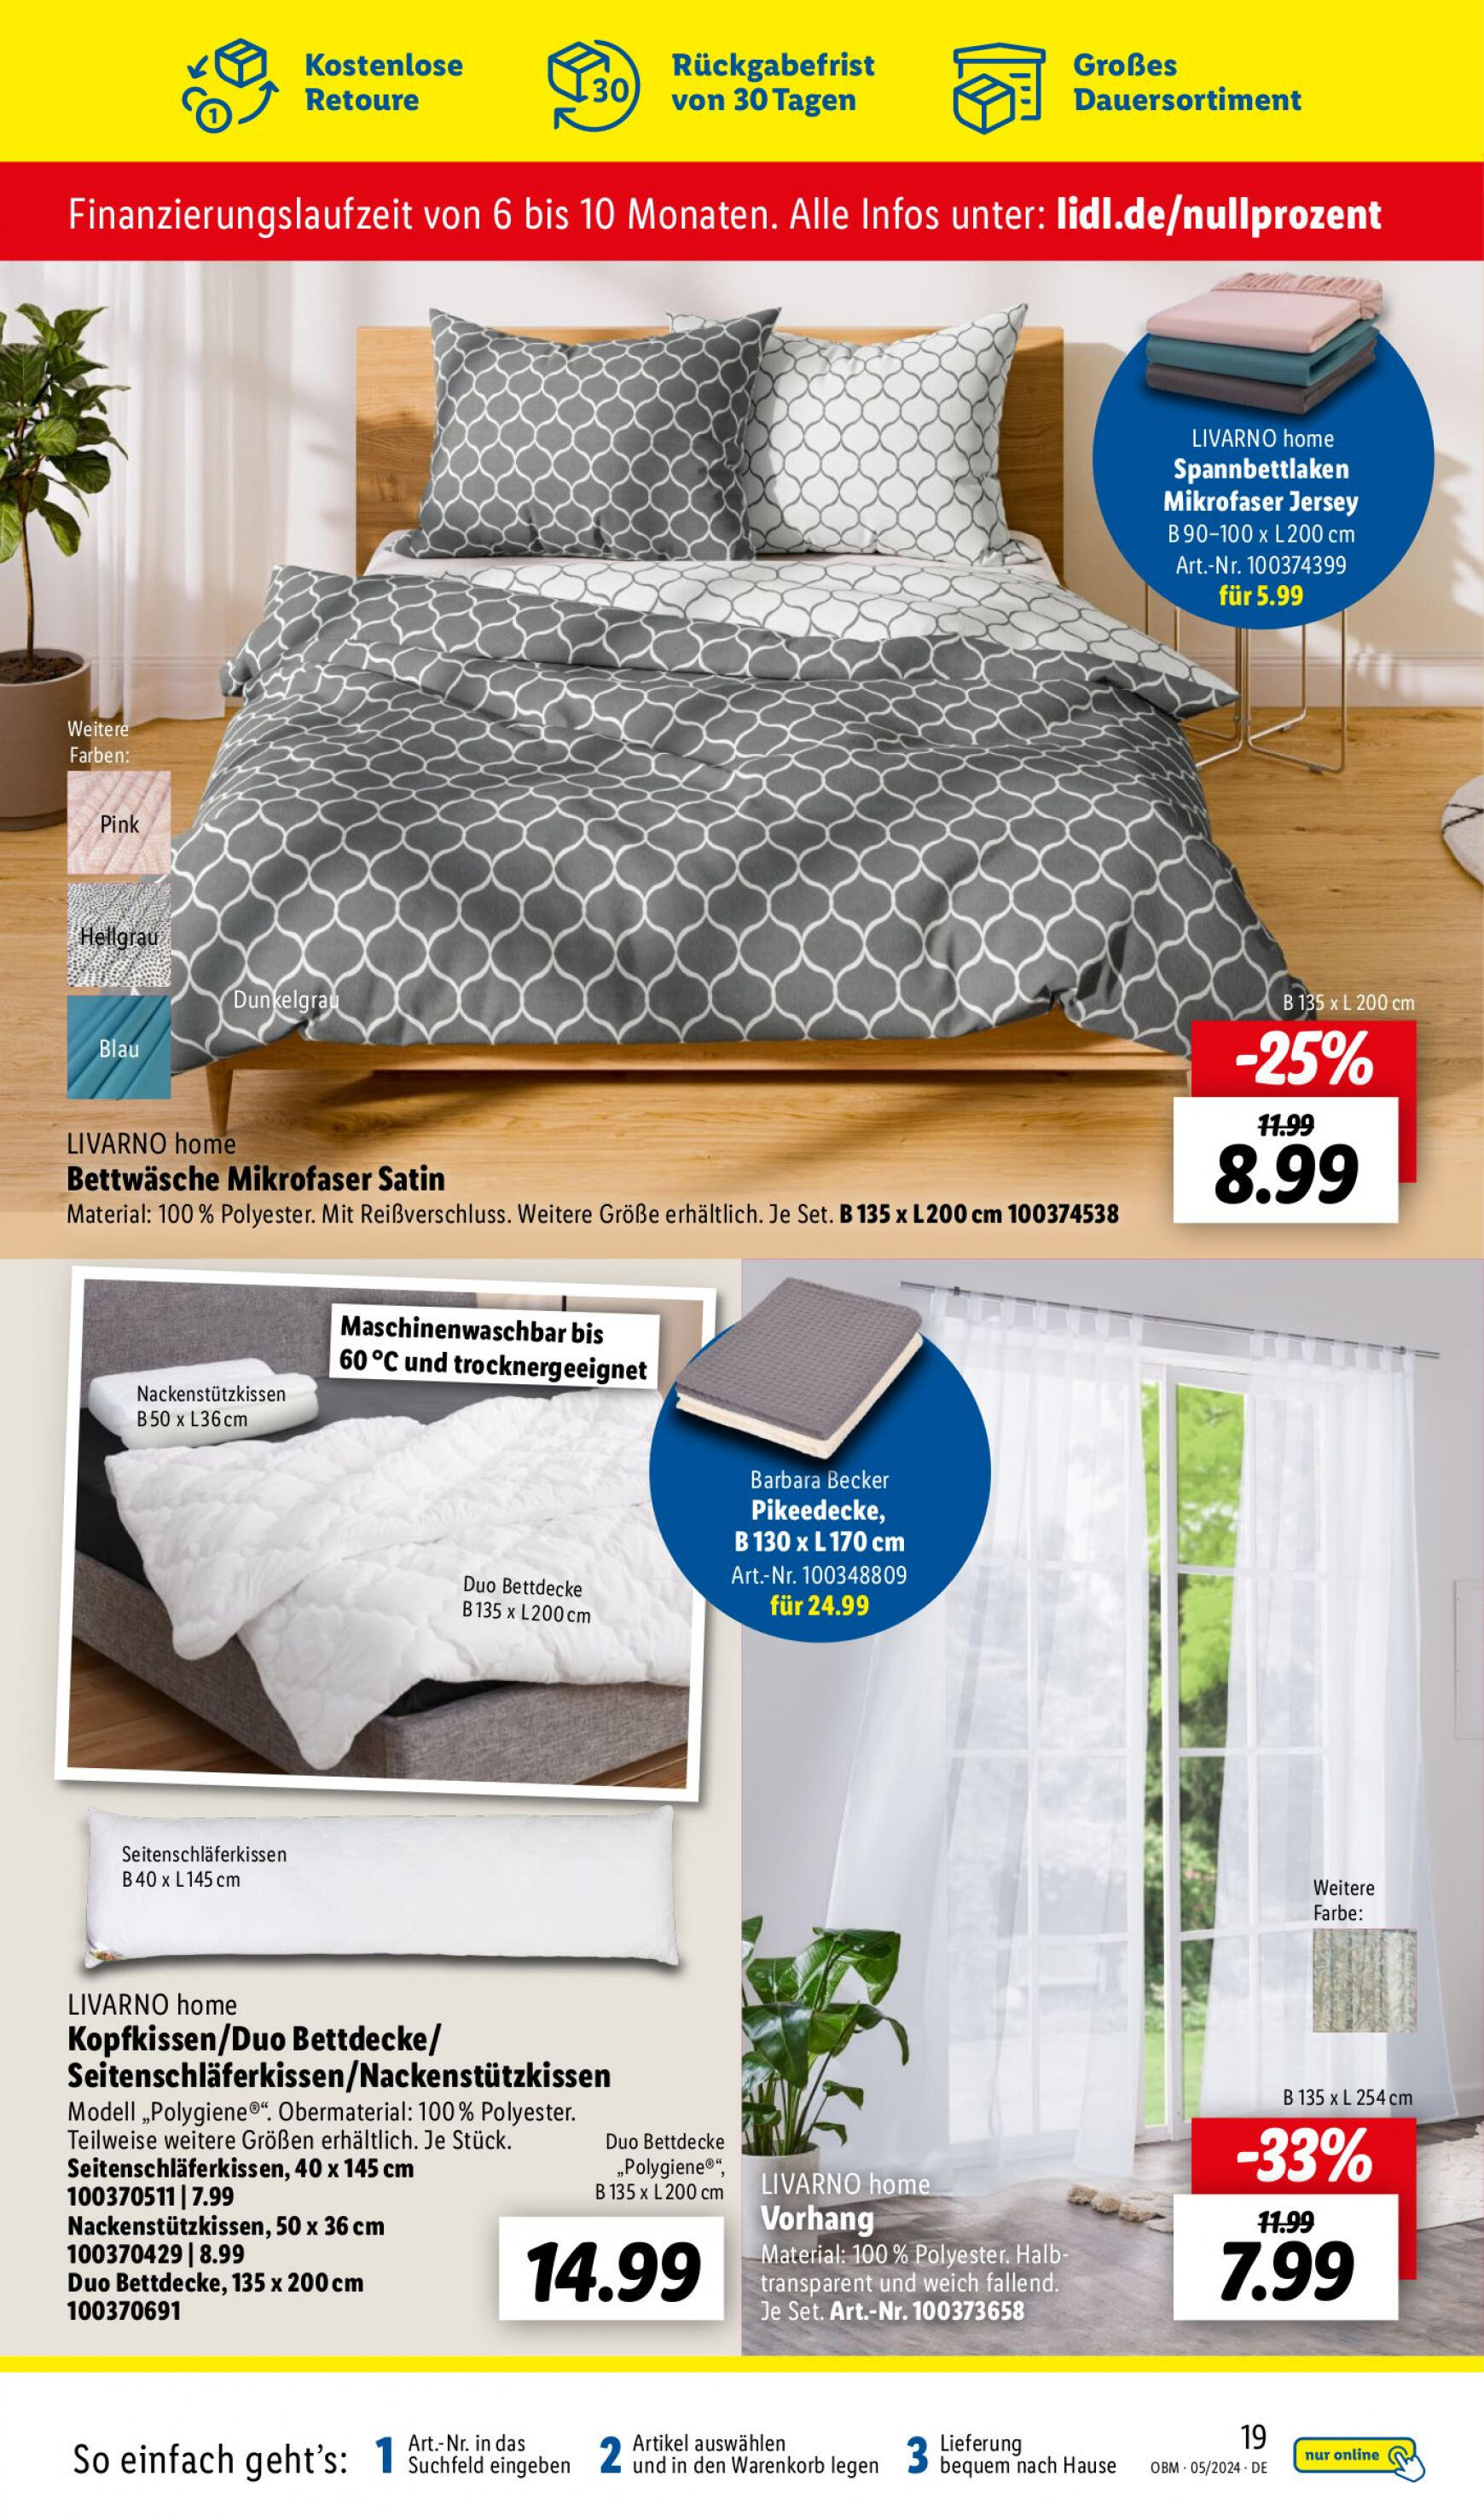 lidl - Flyer Lidl - Aktuelle Onlineshop-Highlights aktuell 01.05. - 31.05. - page: 19